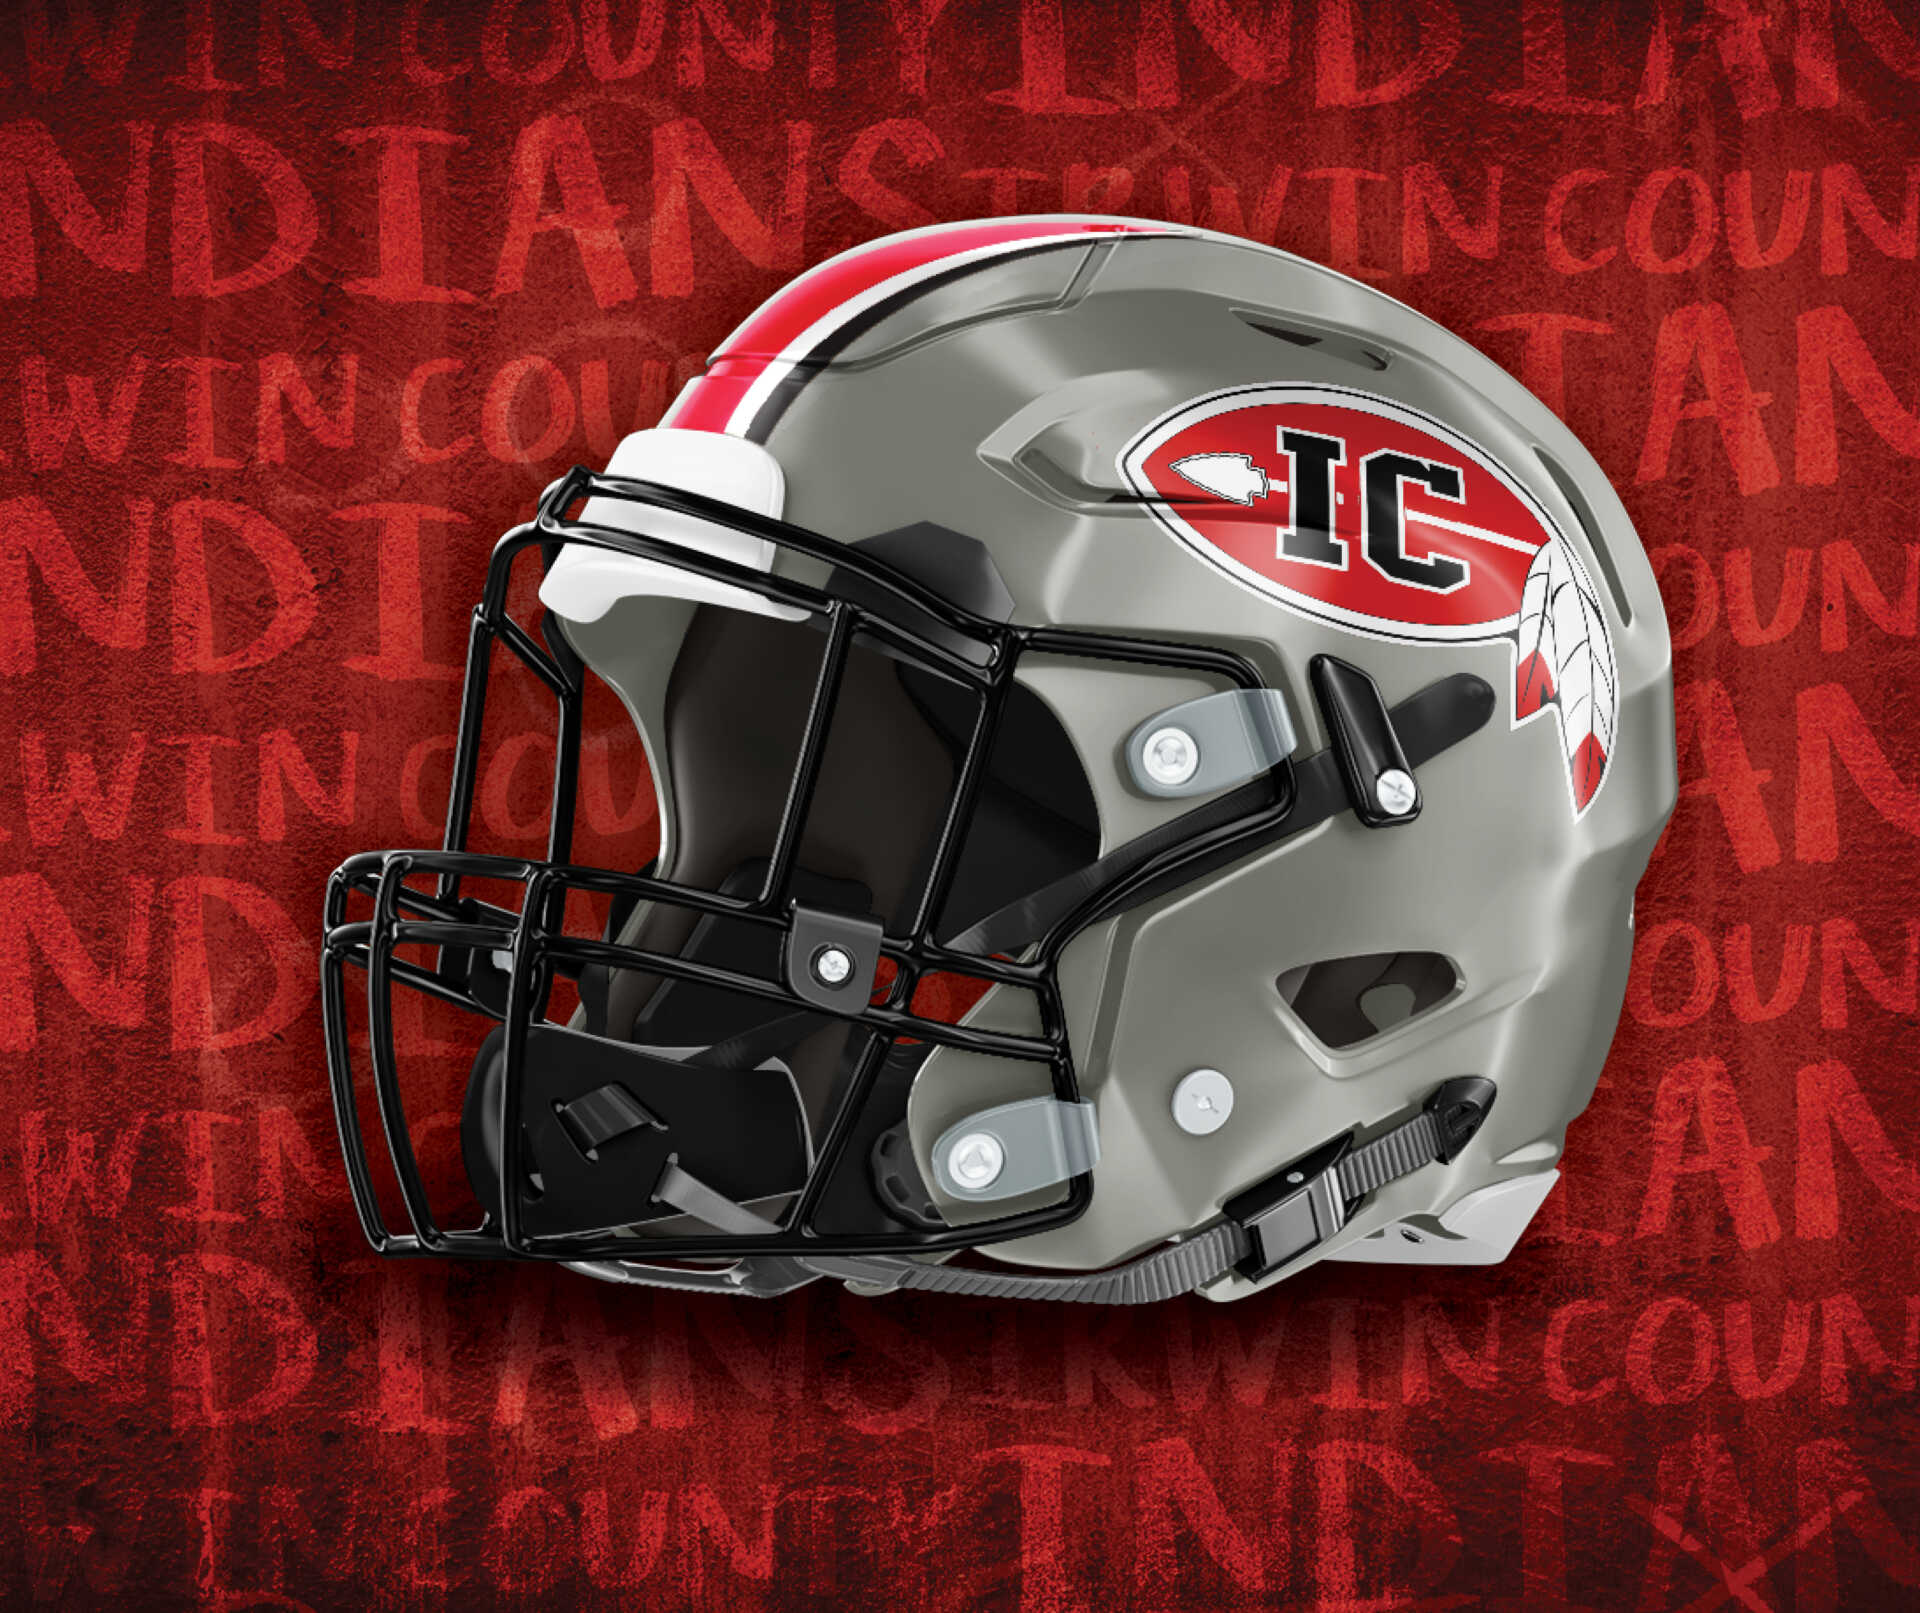 Irwin County Football 2023 Team Preview ITG Next